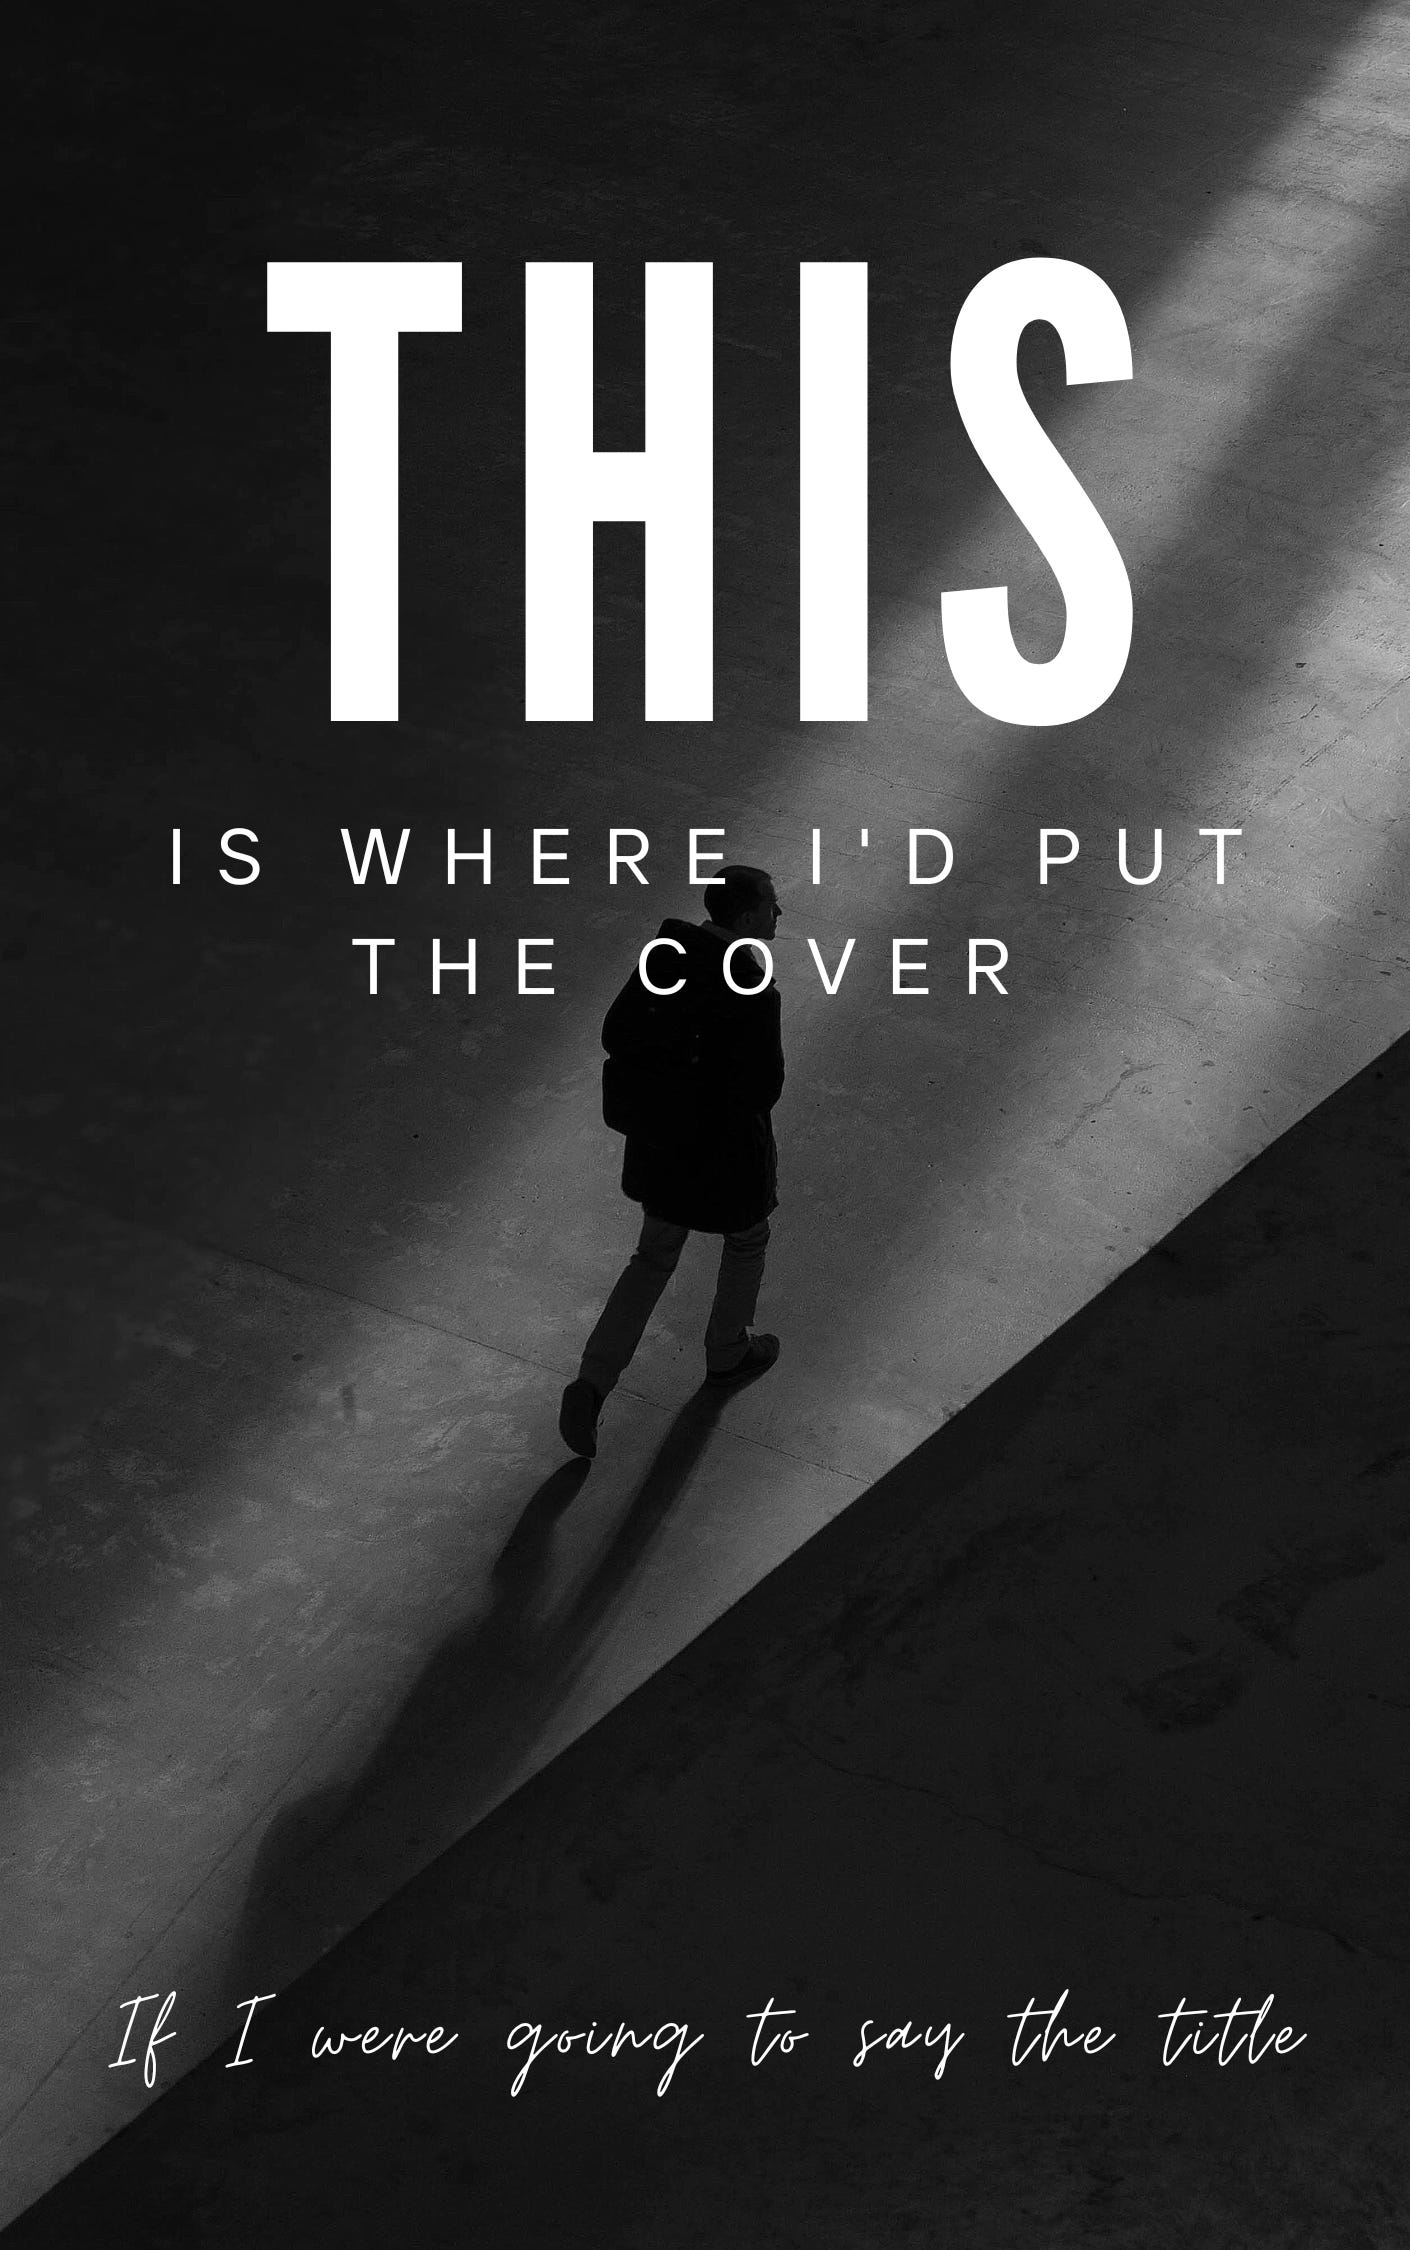 A fake book cover in black and white with a silhouette of a man superimposed with "This is where I'd put the cover if I was going to say the title" 